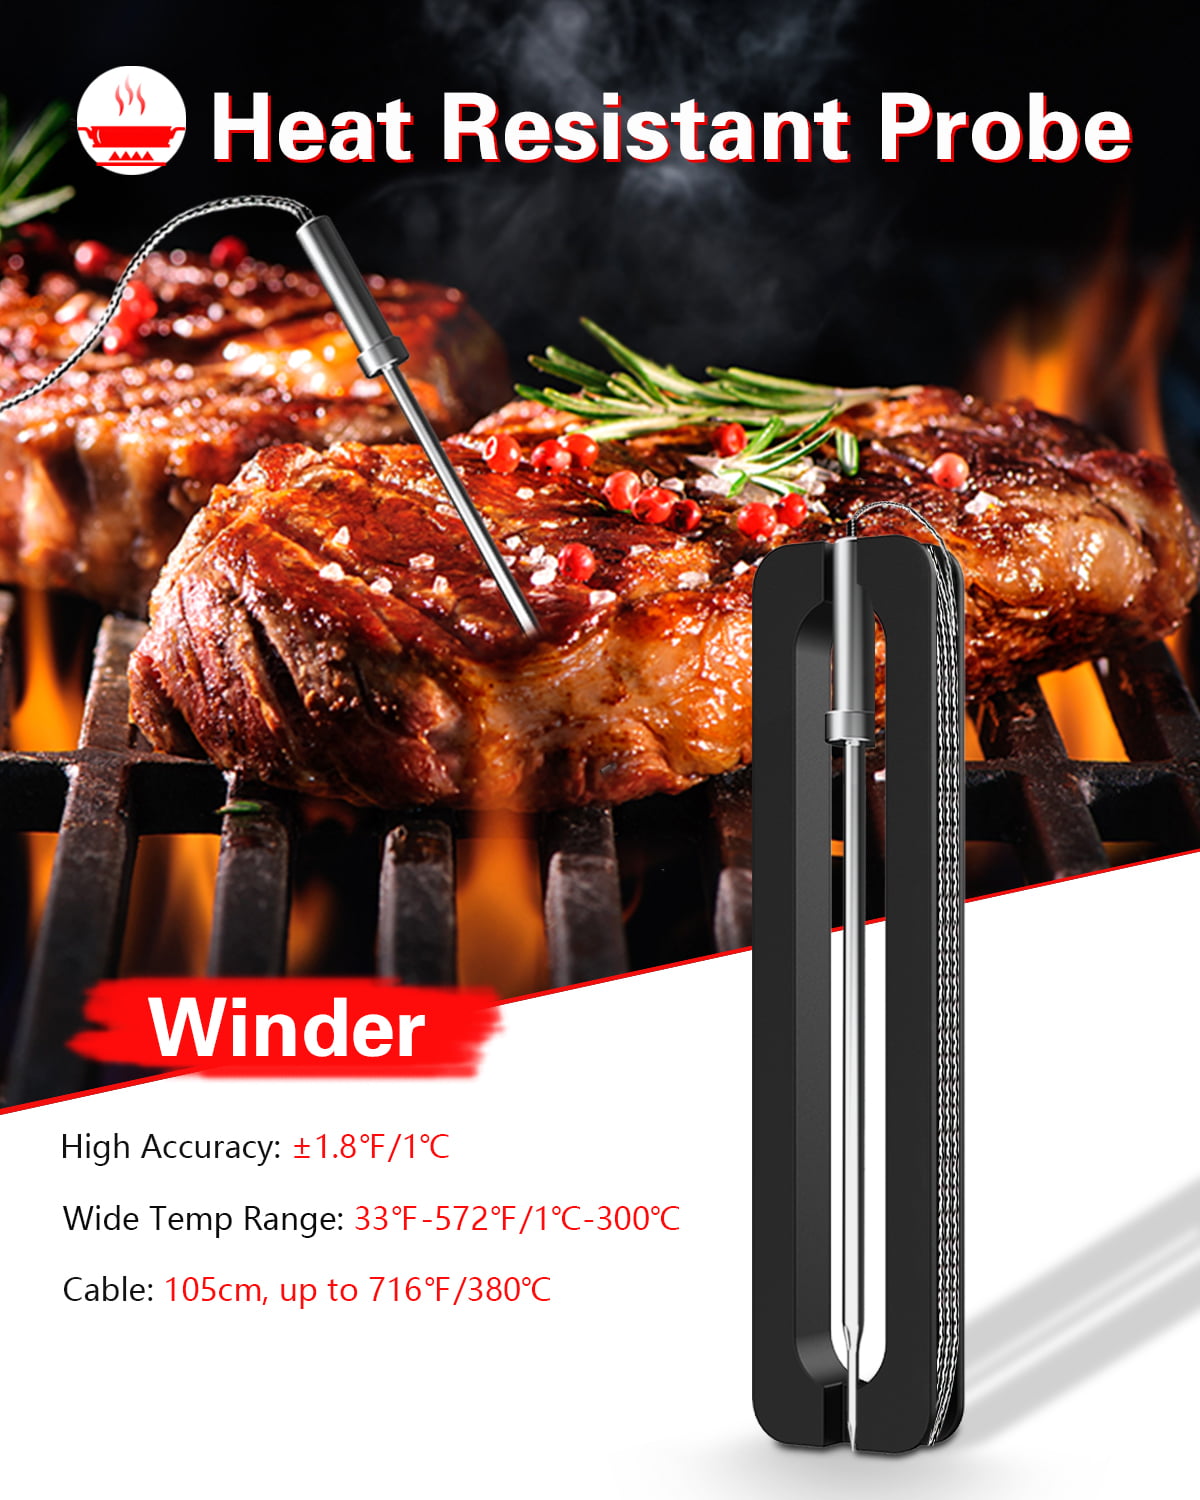 Food Temperature Stainless Steel BBQ Grill Meat Dial Temperature Gauge Gage  Barbecue Thermometer Cooking Probe Kitchen Tool - Price history & Review, AliExpress Seller - futureline9 Store